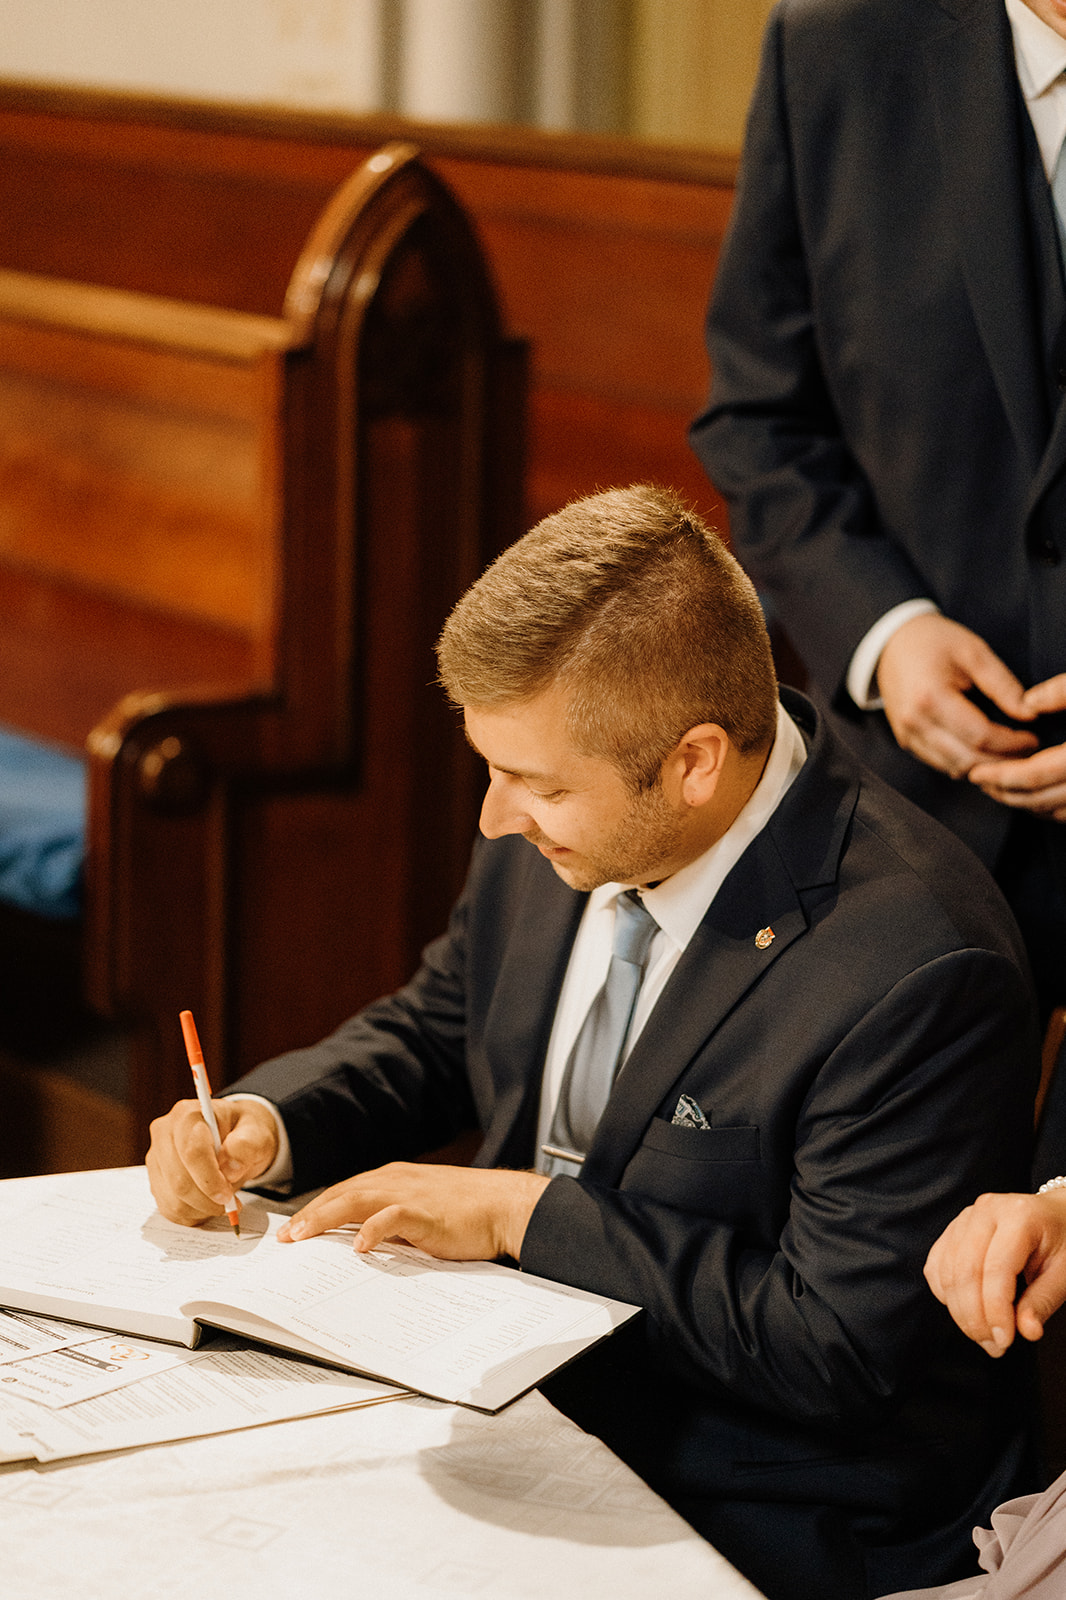 A man signing papers.